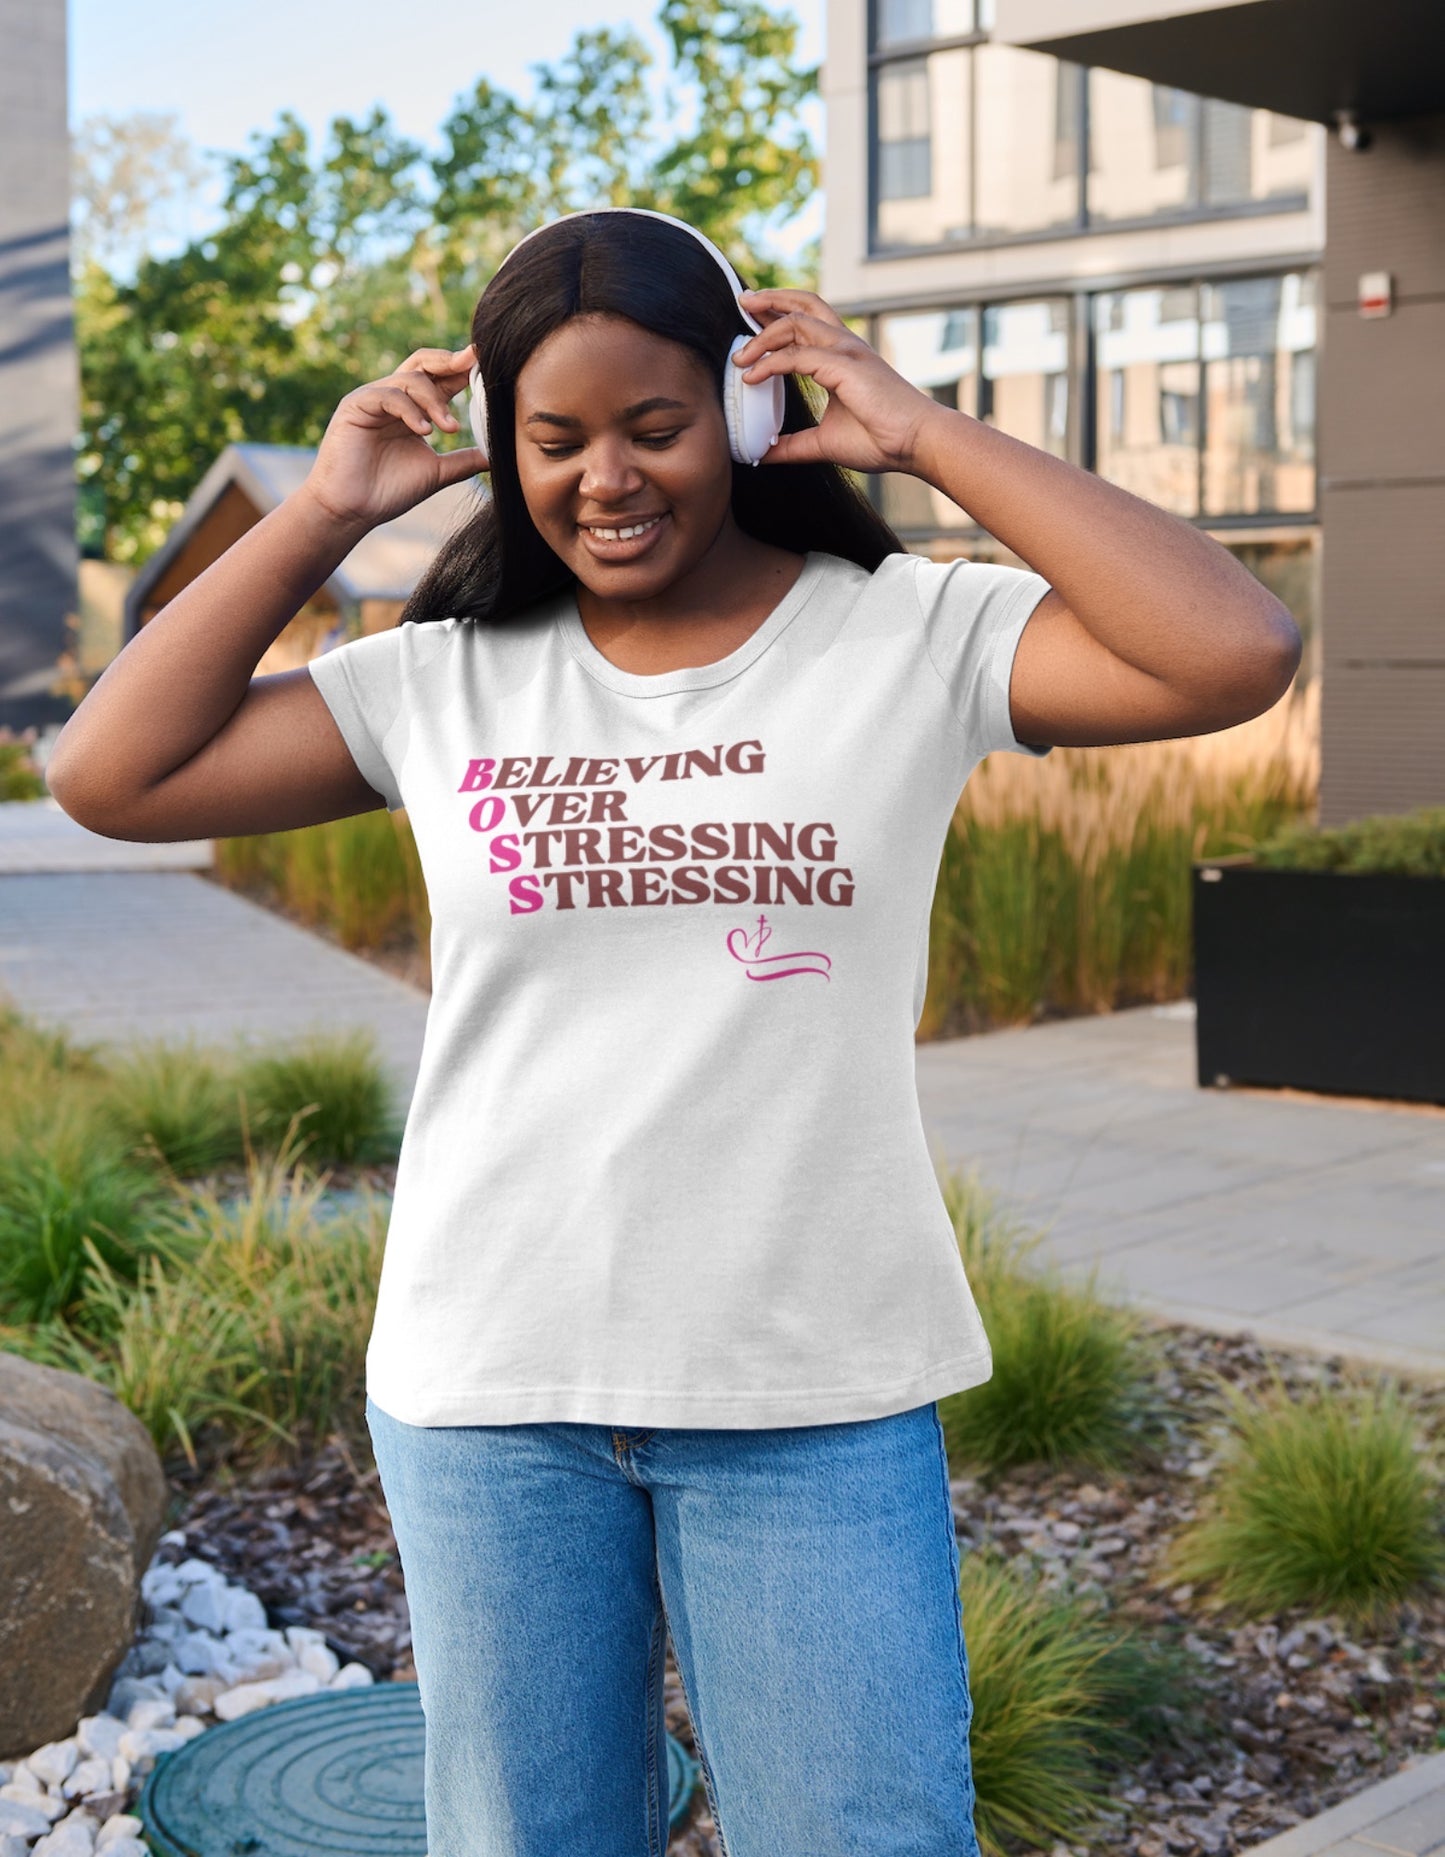 BOSS "Believing Over Stressing" Unisex Faith Inspirational T-shirt in Various Colors T Styles Online